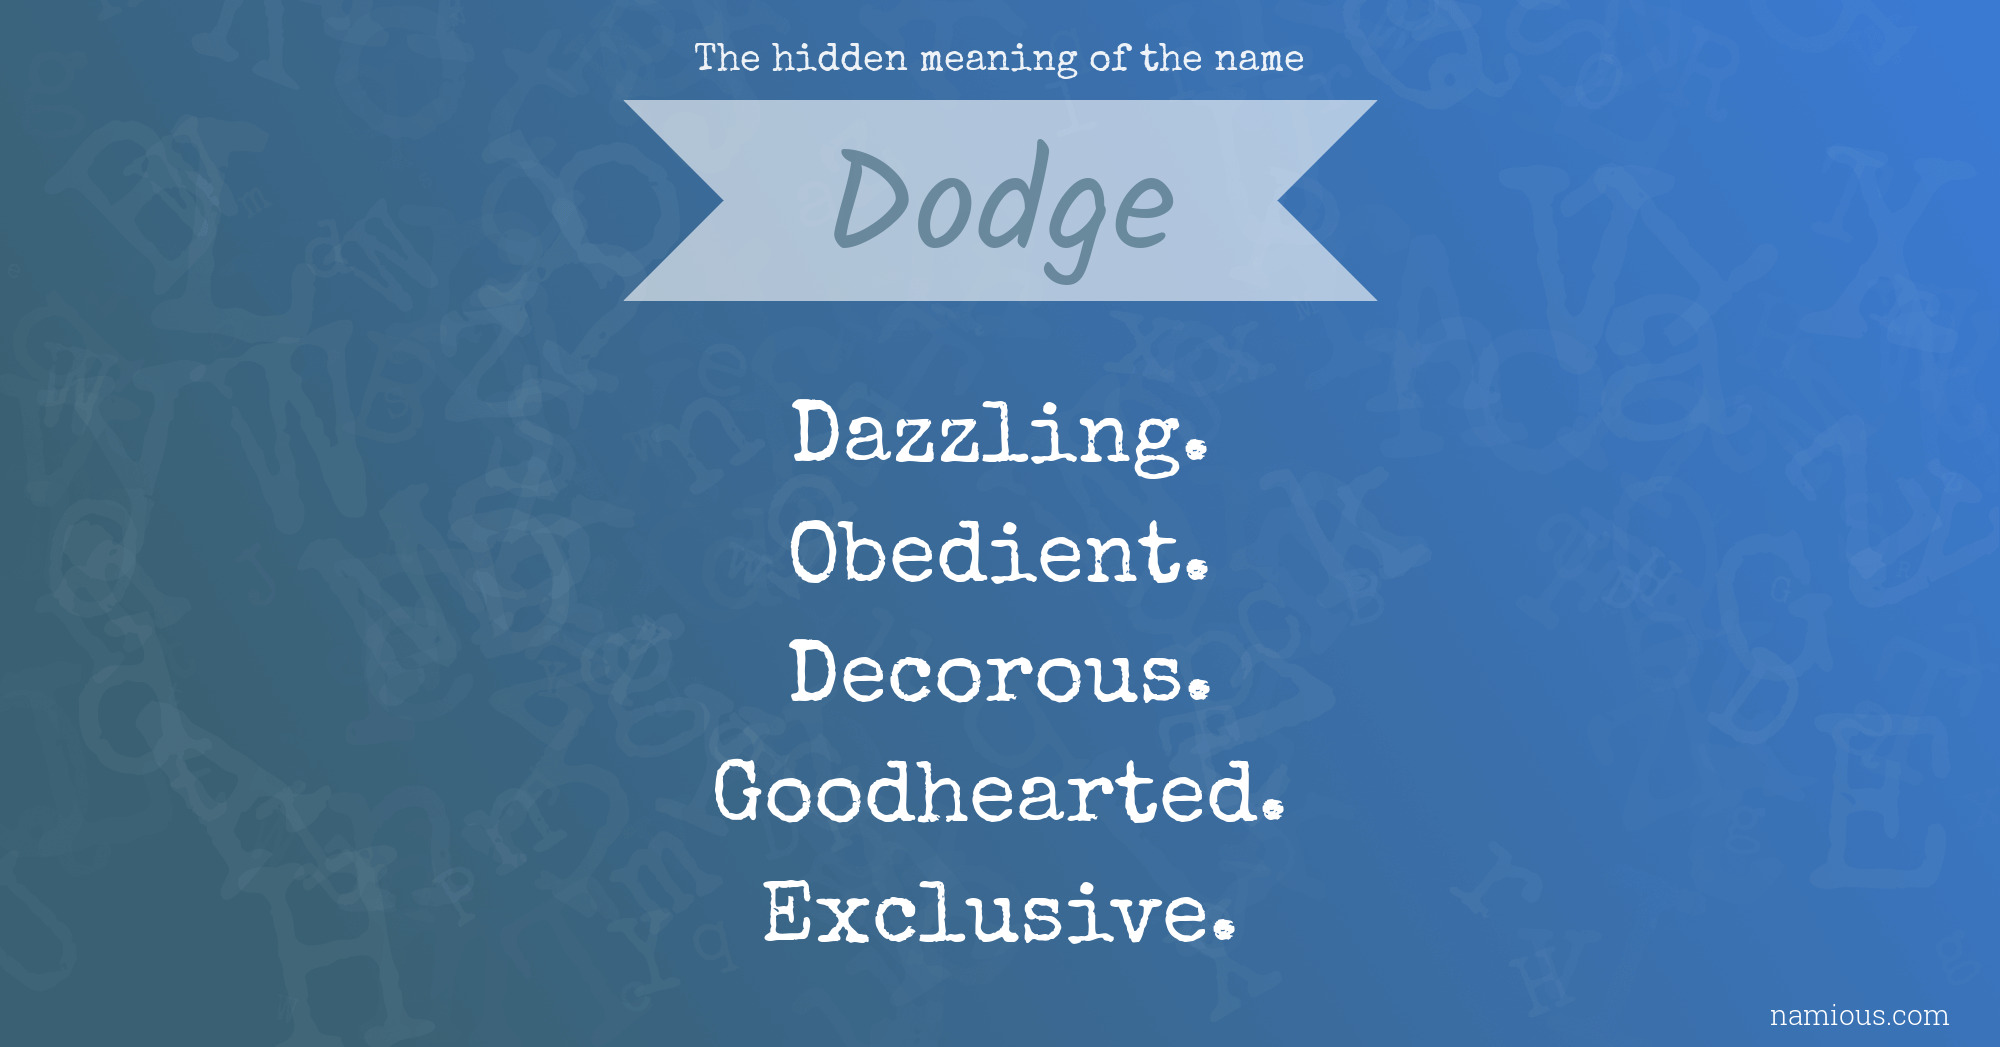 The hidden meaning of the name Dodge